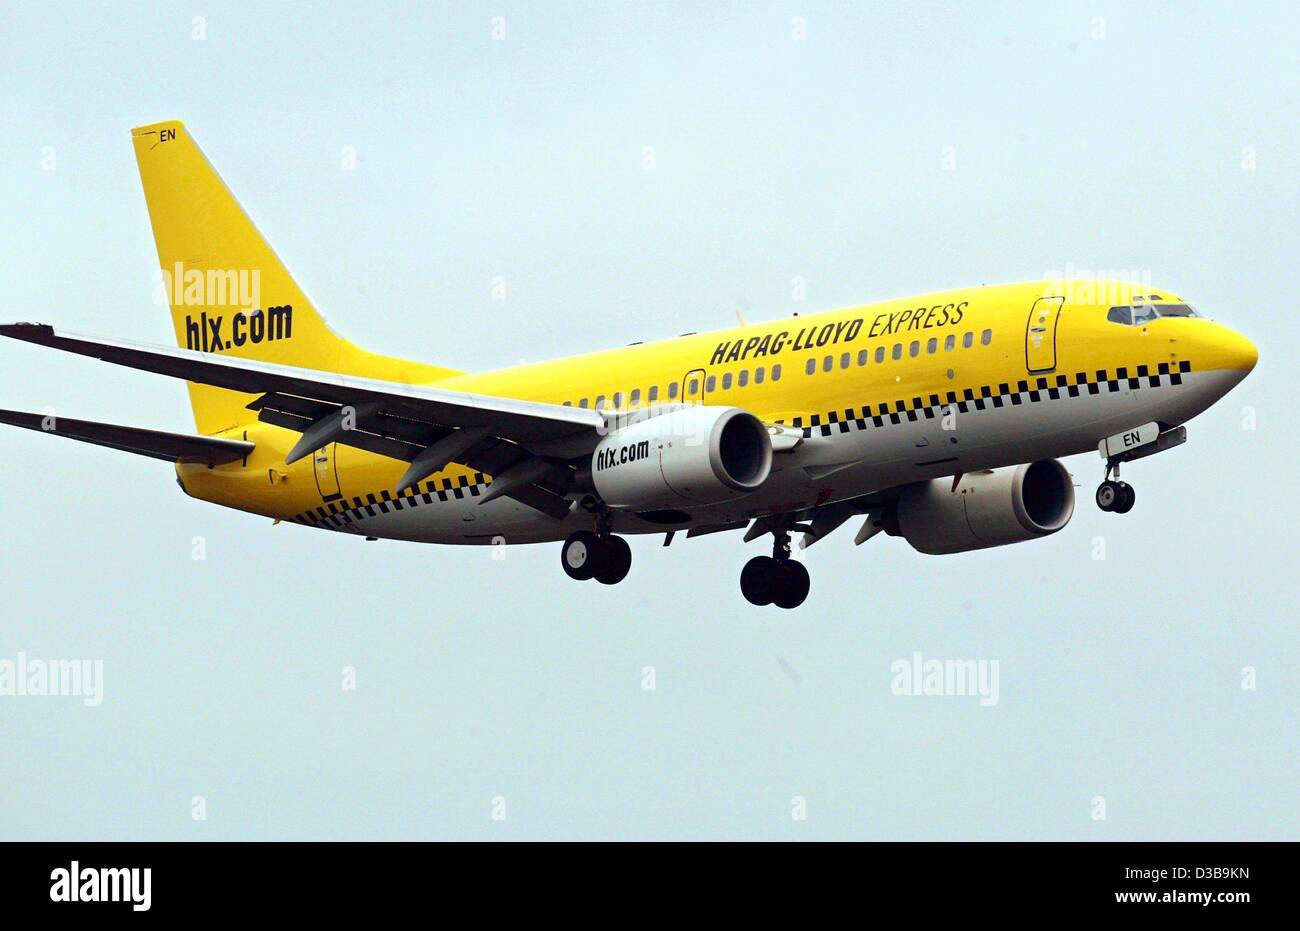 (dpa) - A Boeing 737-700 of the new budget airline Hapag-Lloyd Express approaches Cologne Bonn Airport, 3 December 2002. The striking yellow coating of the plane reminds of New York cabs. Hapag-Lloyd Express belongs to the TUI group and flies to Hamburg, Berlin, London, and four Italian destinations Stock Photo